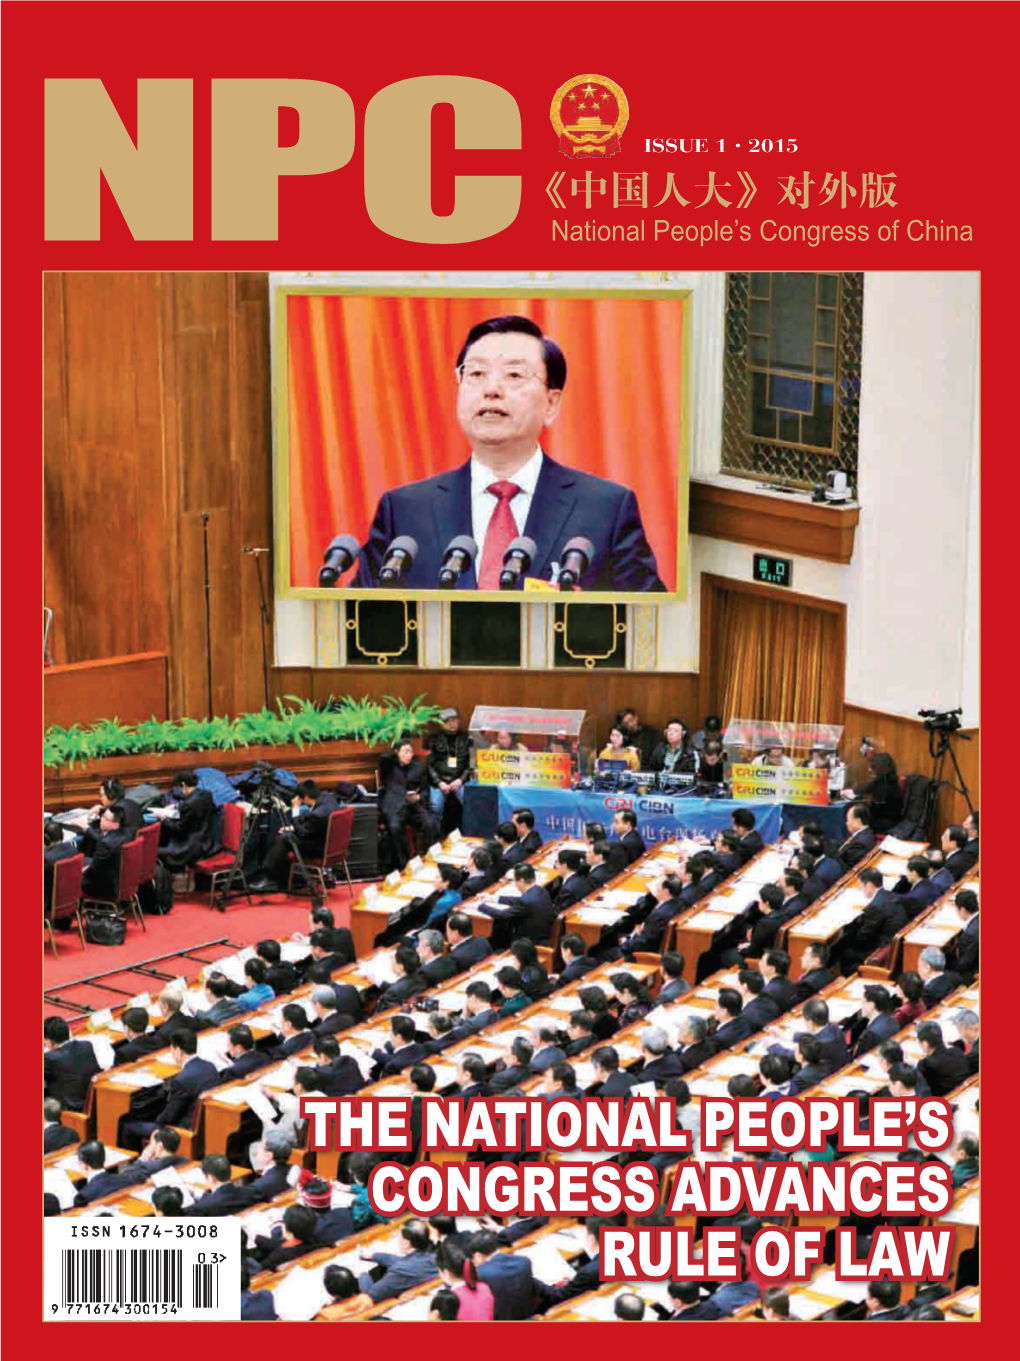 Issue 1 2015